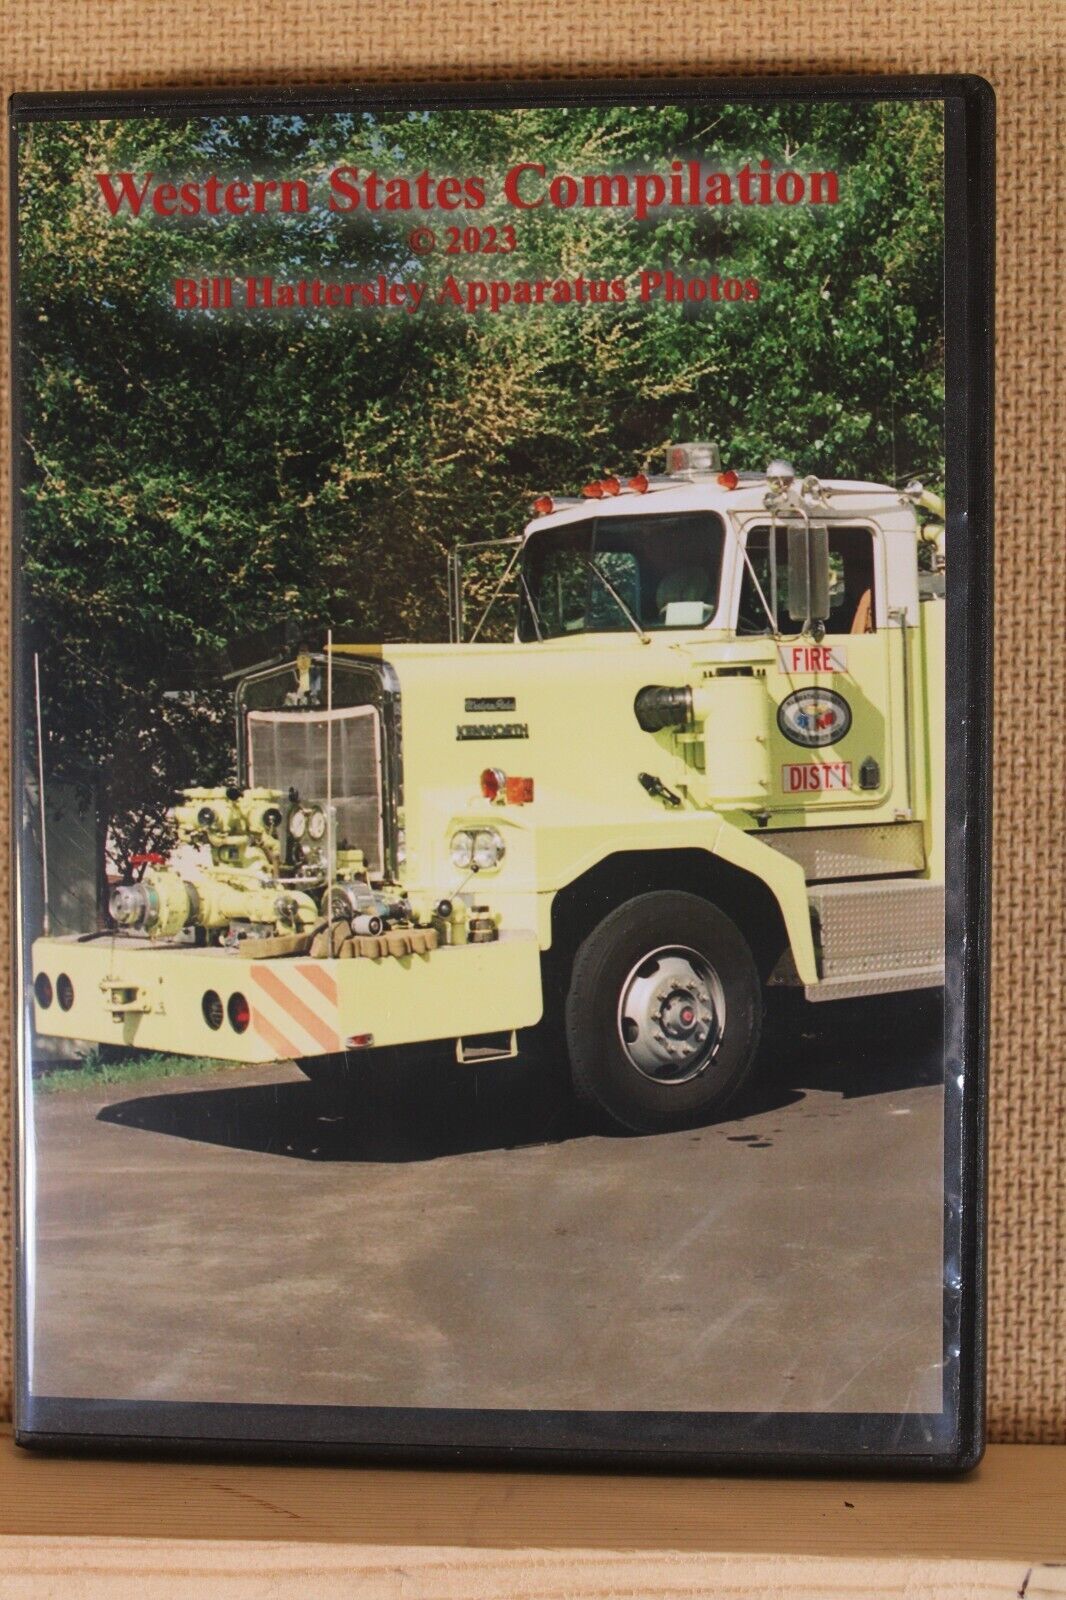 NEW-355 WESTERN-STATES Fire Apparatus Photos on FLASH-DRIVE-355 rig images